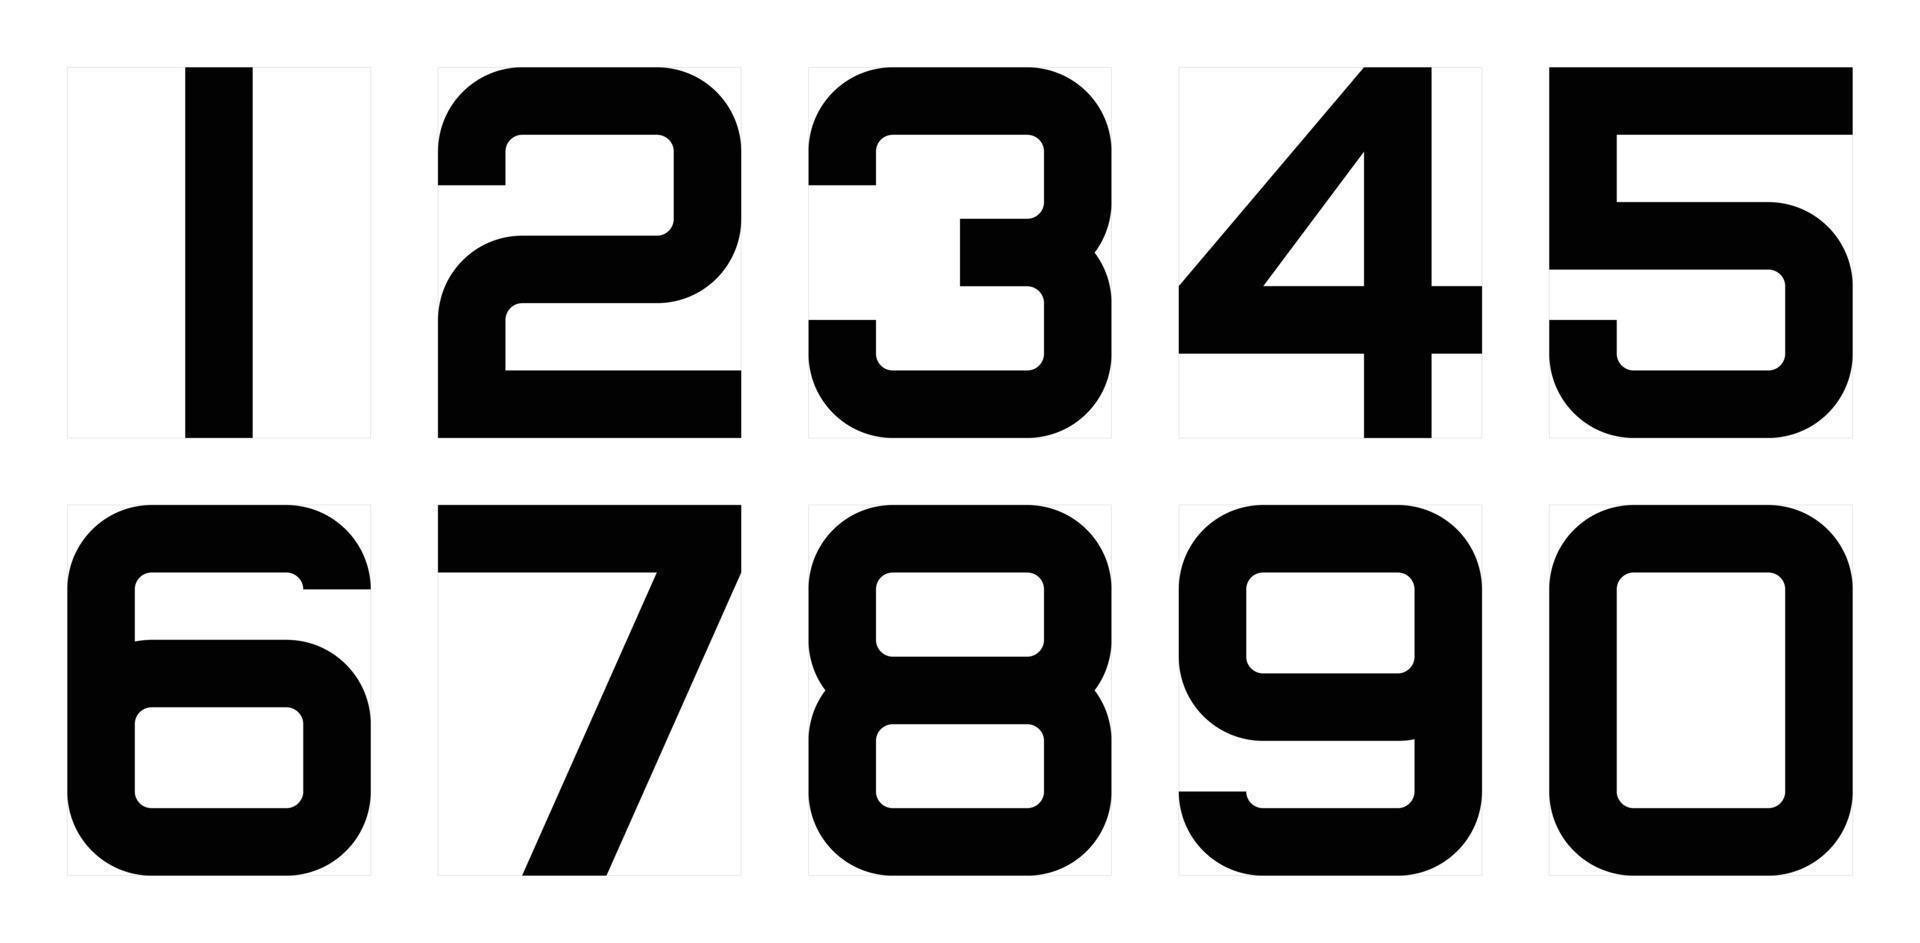 Black numbers on a white background vector